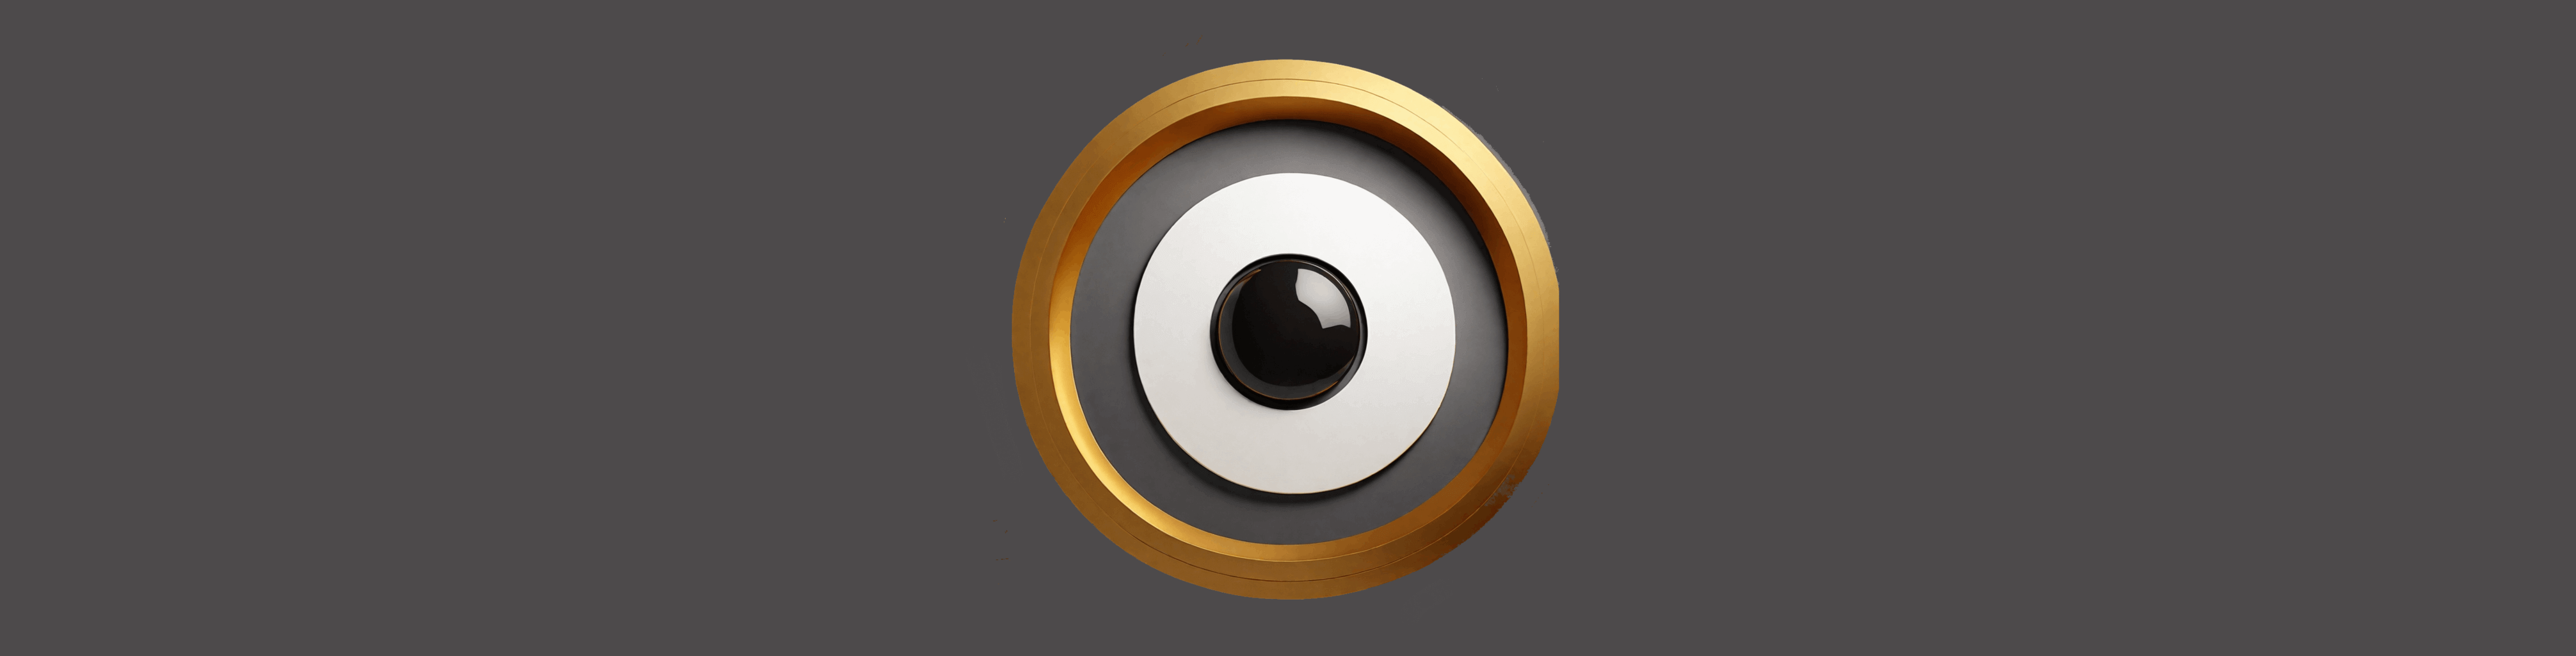 An eye surrounded by a gold circle with a gray background